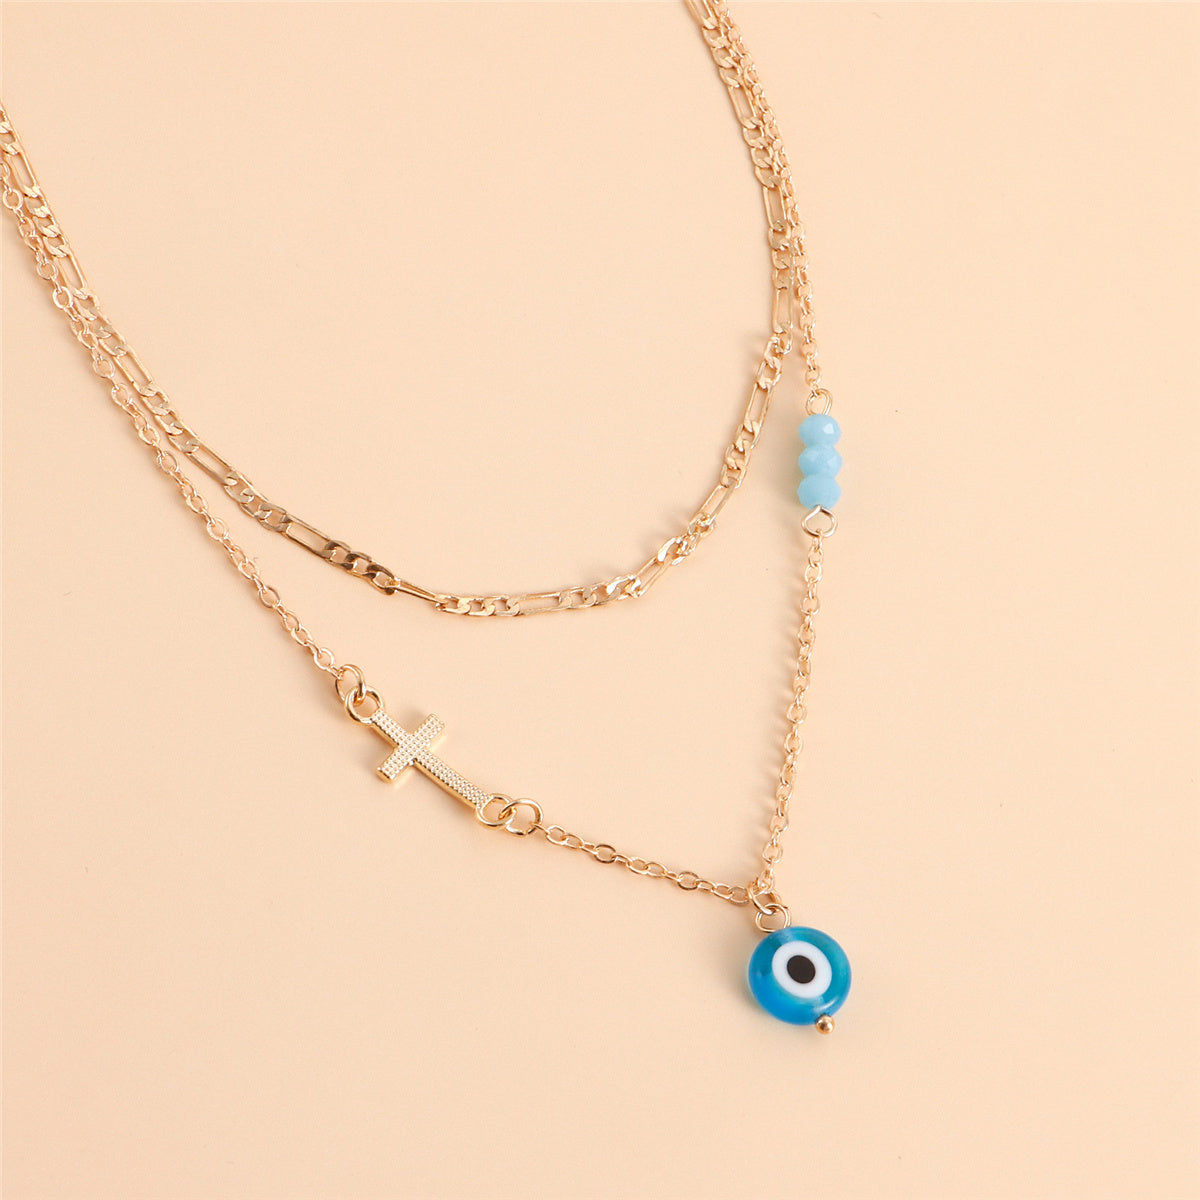 Turquoise & Cubic Zirconia 18K Gold-Plated Evil Eye Pendant Necklace